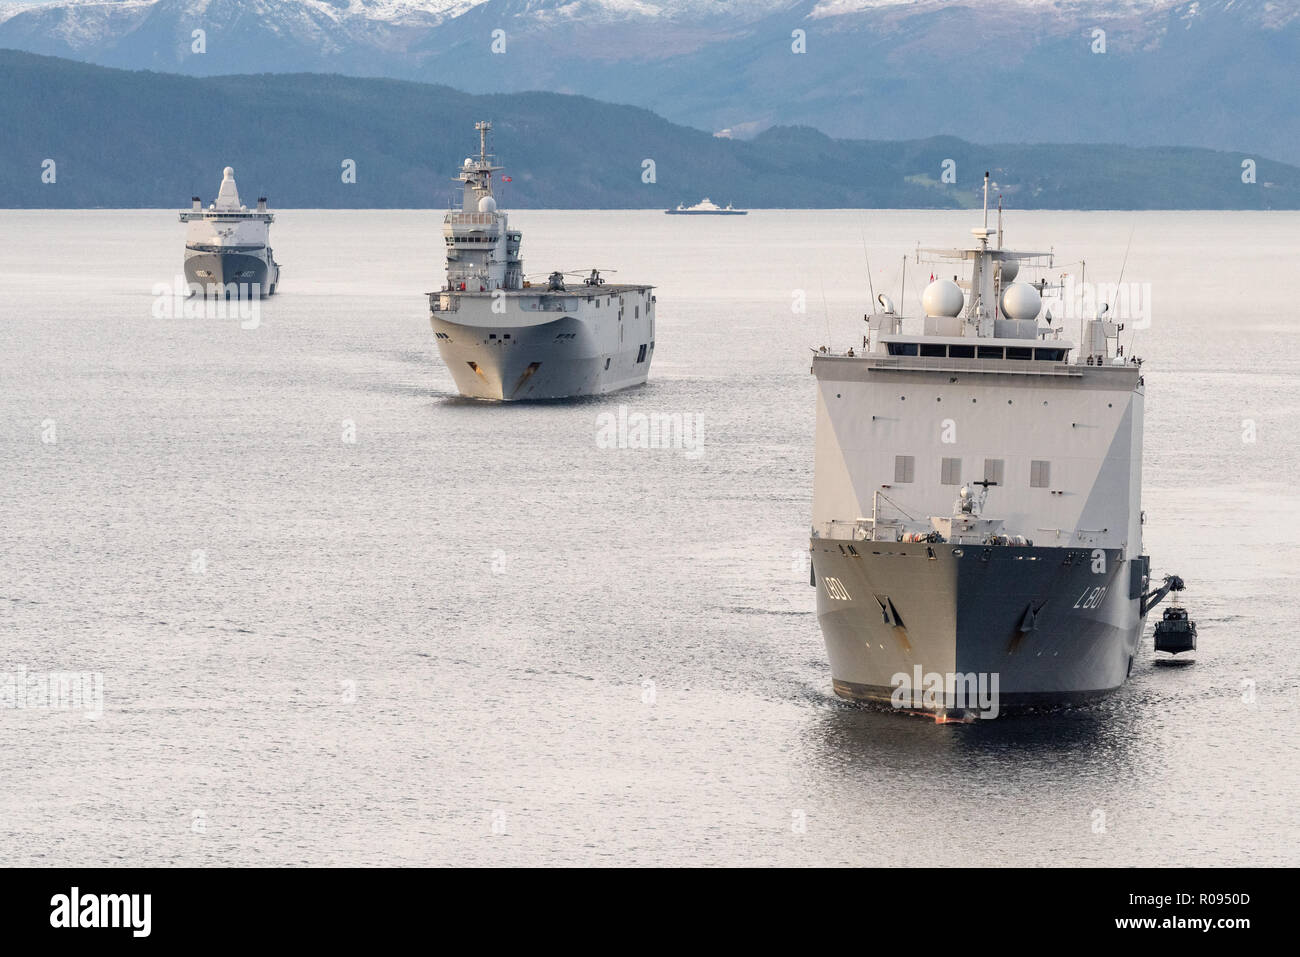 NORWAY, Nov. 1.  2018. GEN. SNMG2 VESSELS ESCORT AMPHIBIOUS TASK GROUP   HNLMS Johan de Witt , HNLMS Karel Doorman, and FS Dixmude in the Molde Fjords to conduct Amphibious Assault.  Trident Juncture 18 is designed to ensure that NATO forces are trained, able to operate together and ready to respond to any threat from any direction. Trident Juncture 18 takes place in Norway and the surrounding areas of the North Atlantic and the Baltic Sea, including Iceland and the airspace of Finland and Sweden.     With around 50,000 participants from 31 nations Trident Juncture 2018 is one of NATO’s larges Stock Photo